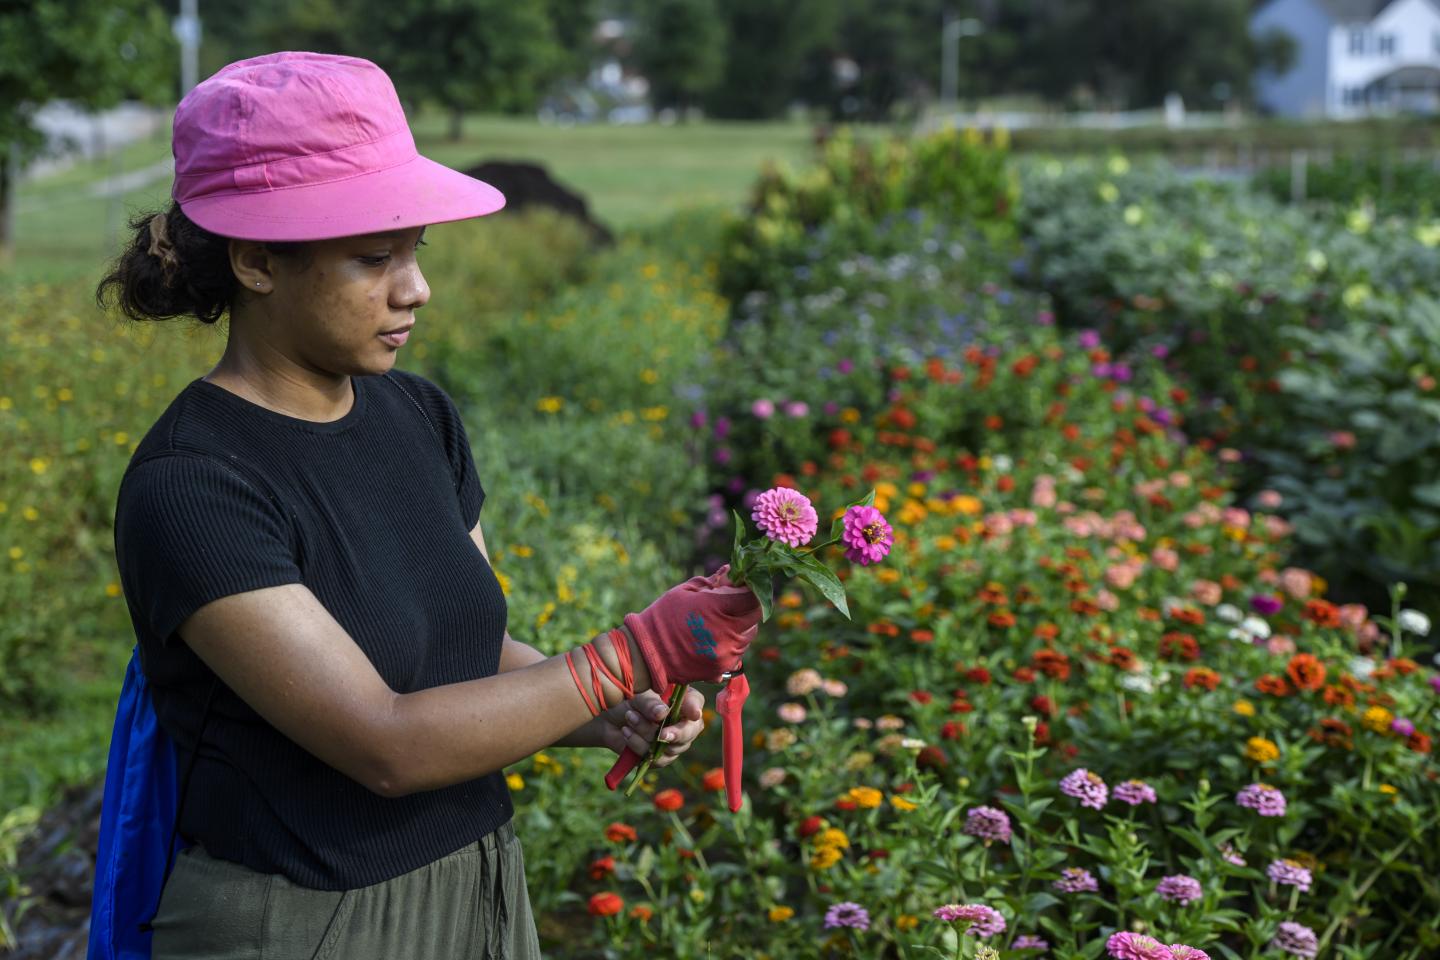 A person picks flowers from a field